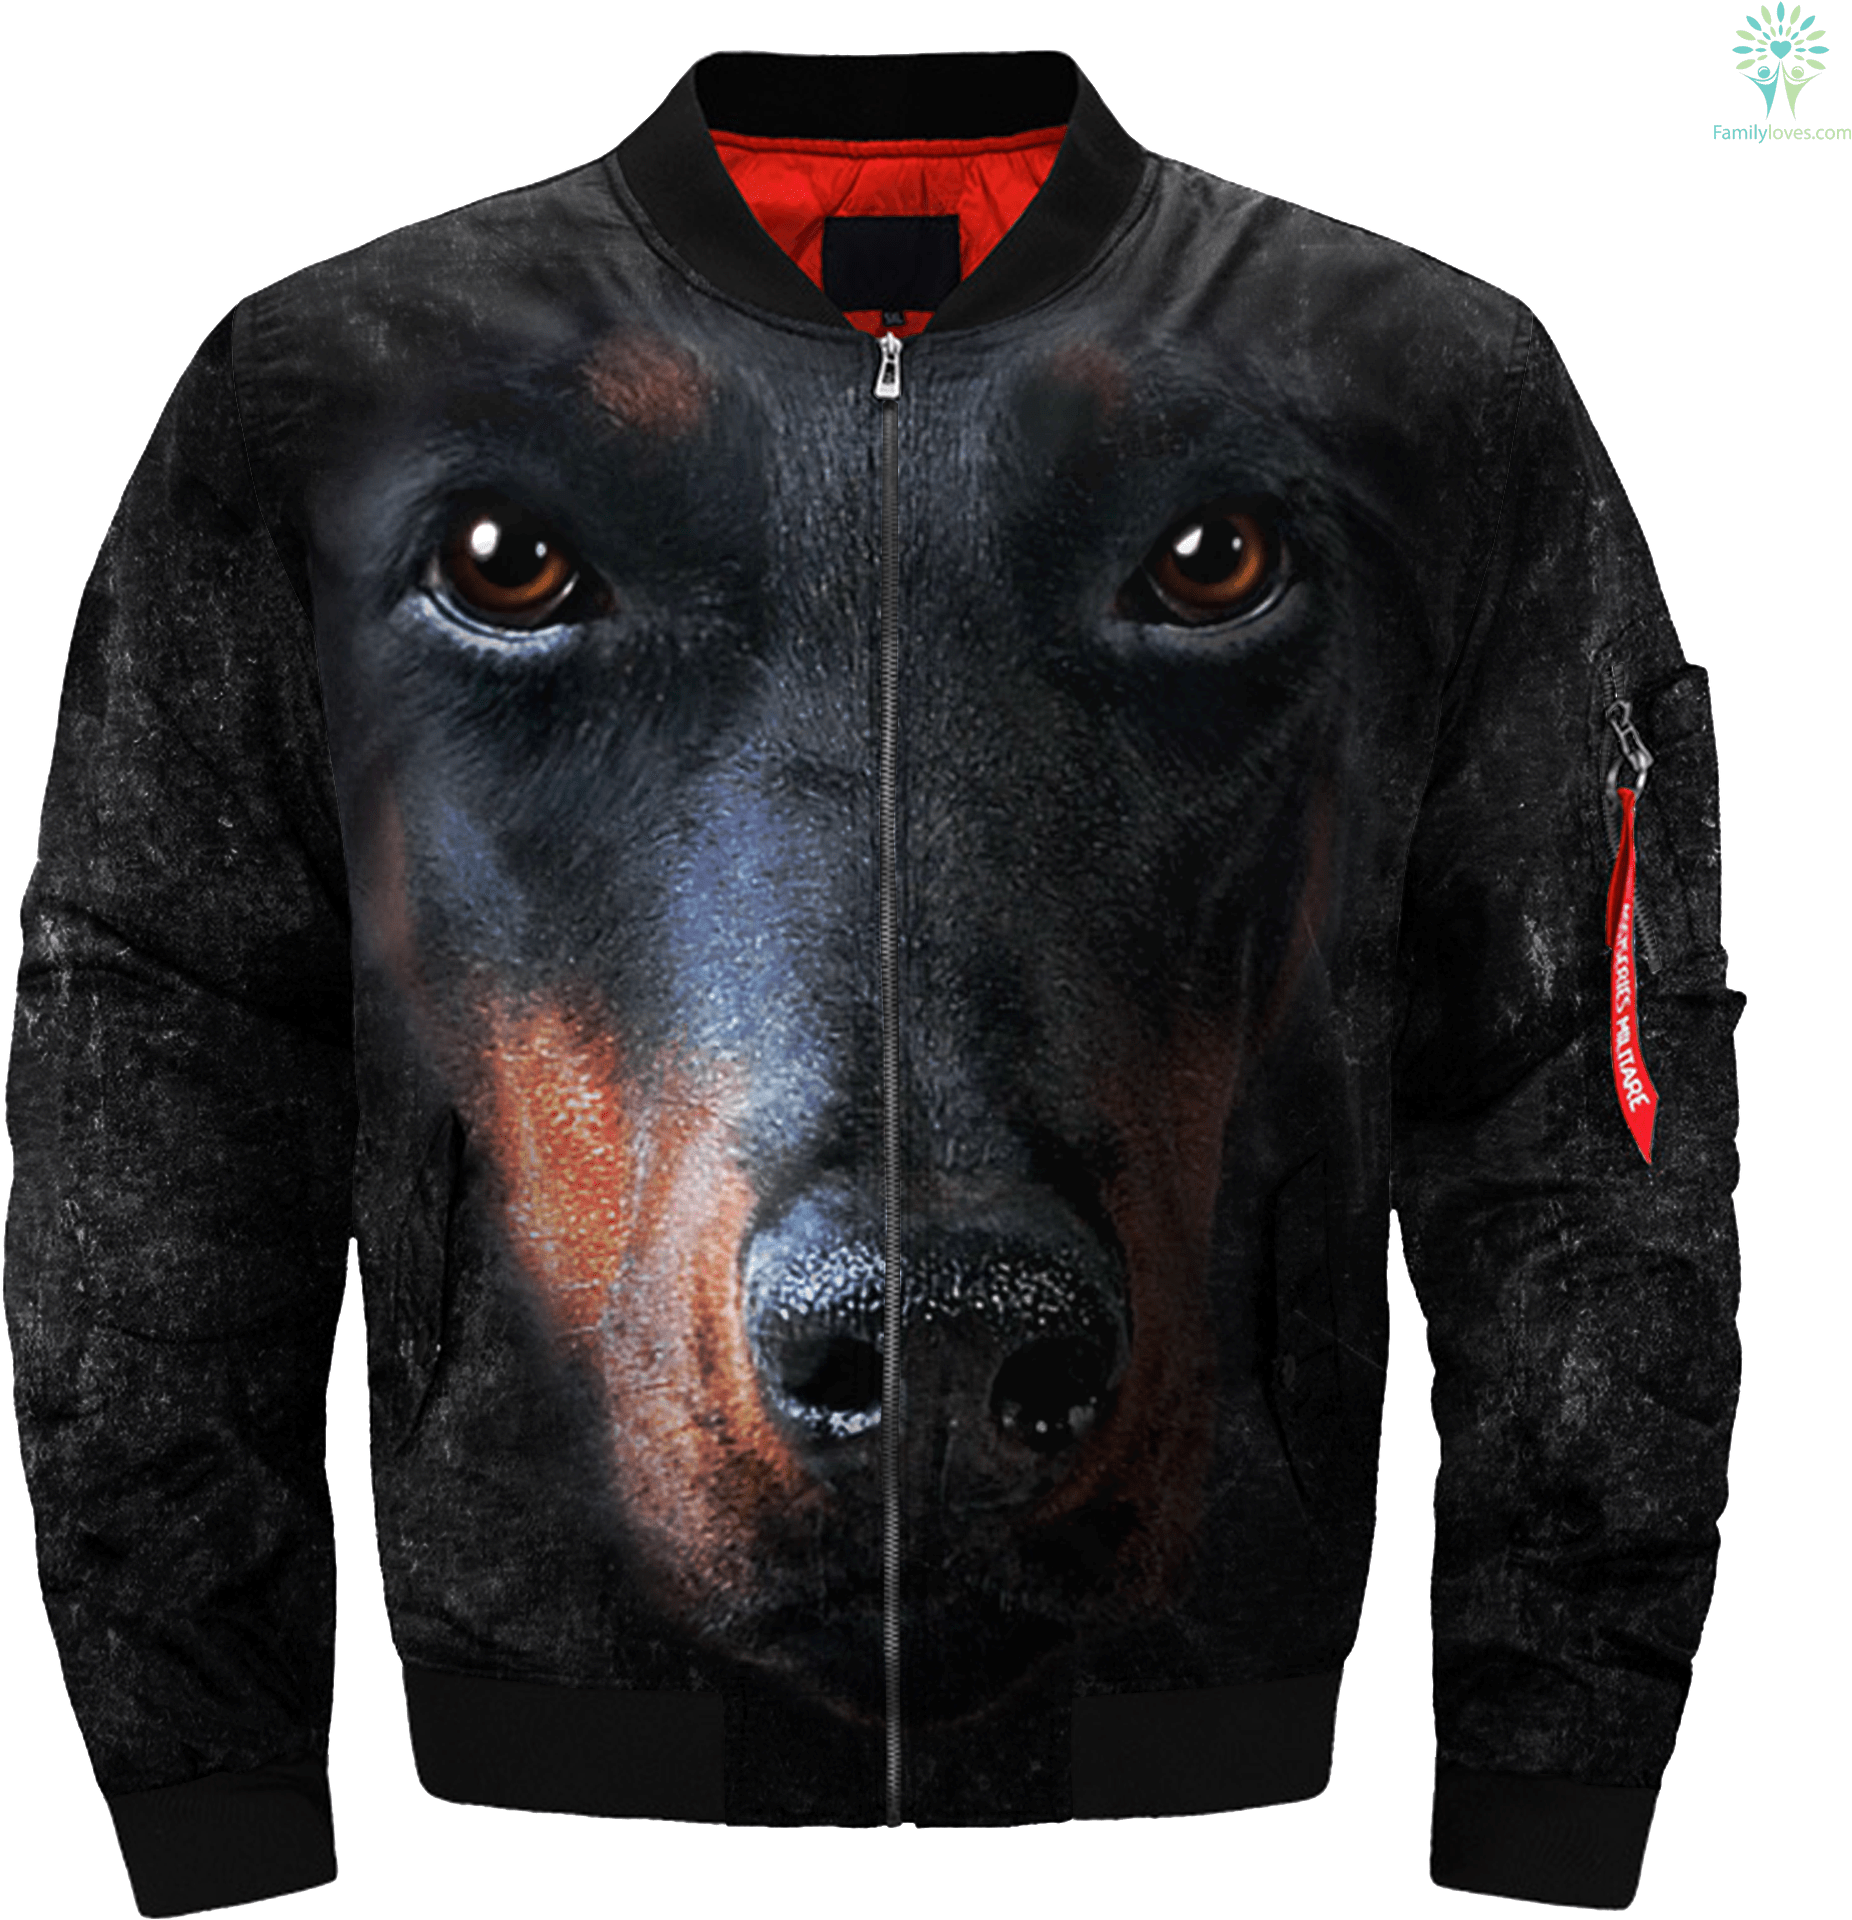 A Black Jacket With A Dog Face